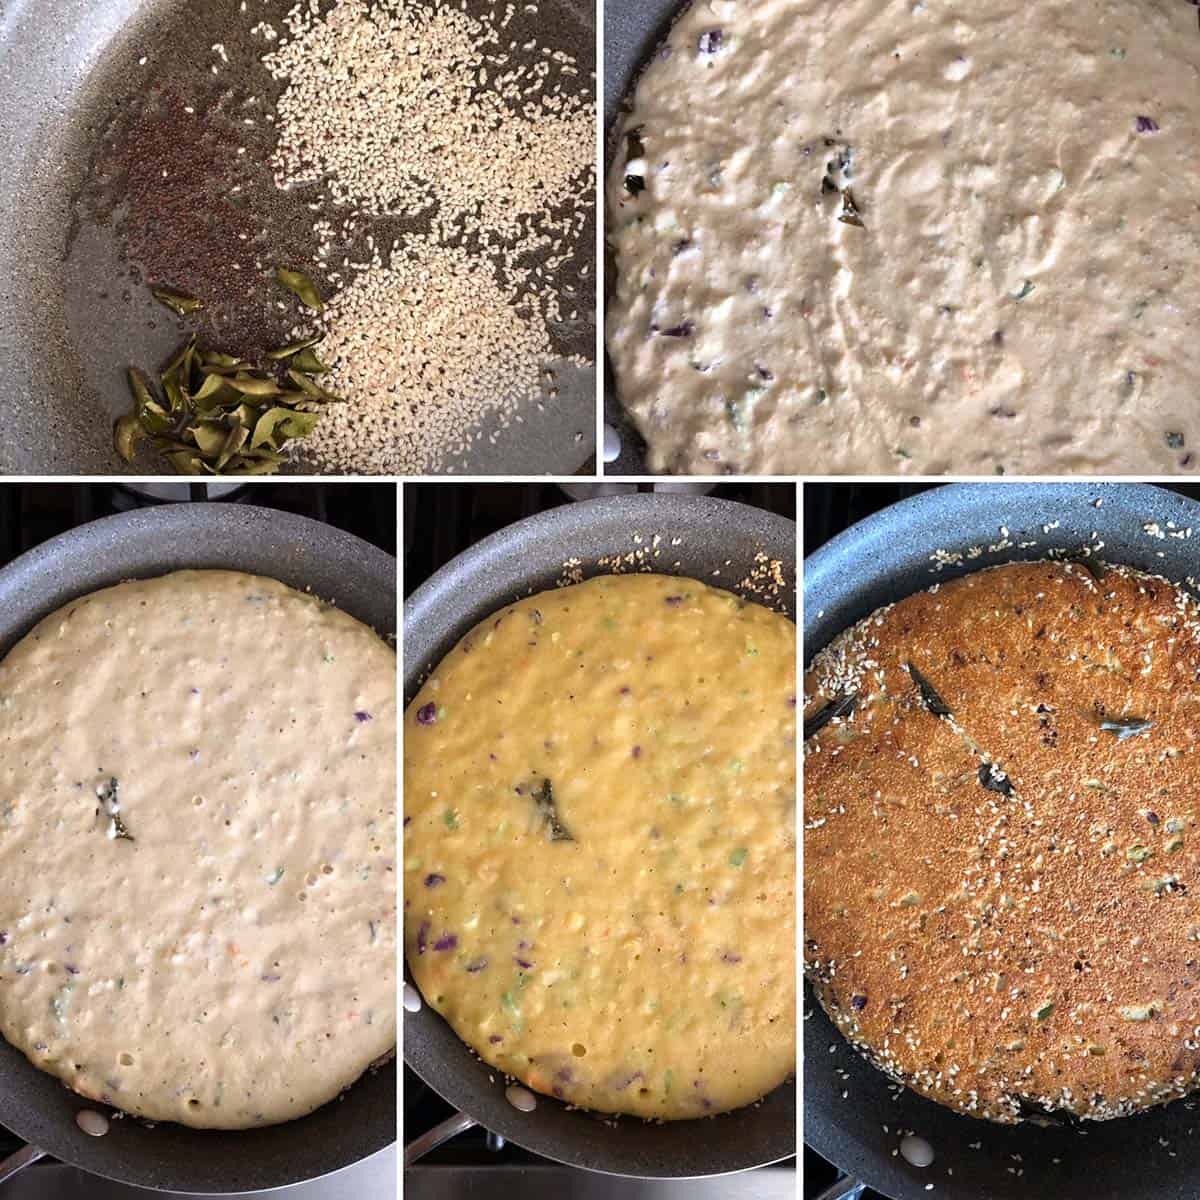 5 panel photo showing the cooking of handvo in a skillet.